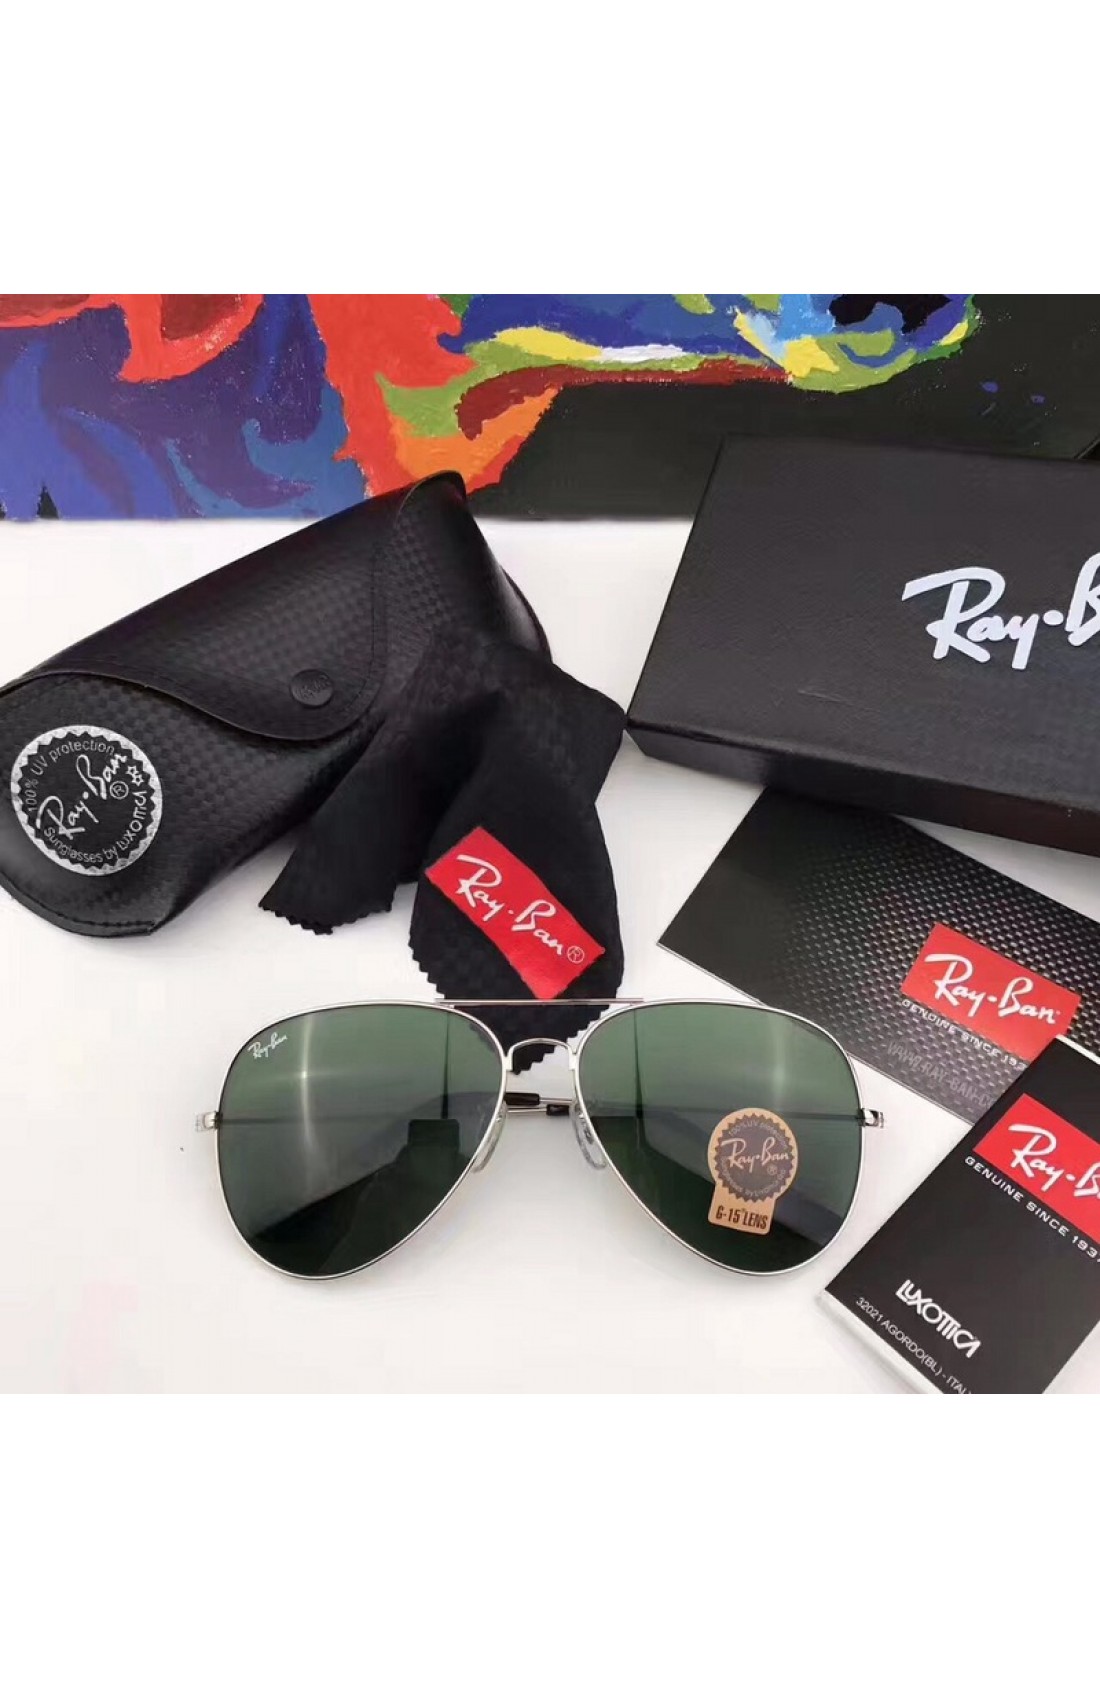 where to buy ray bans for cheap